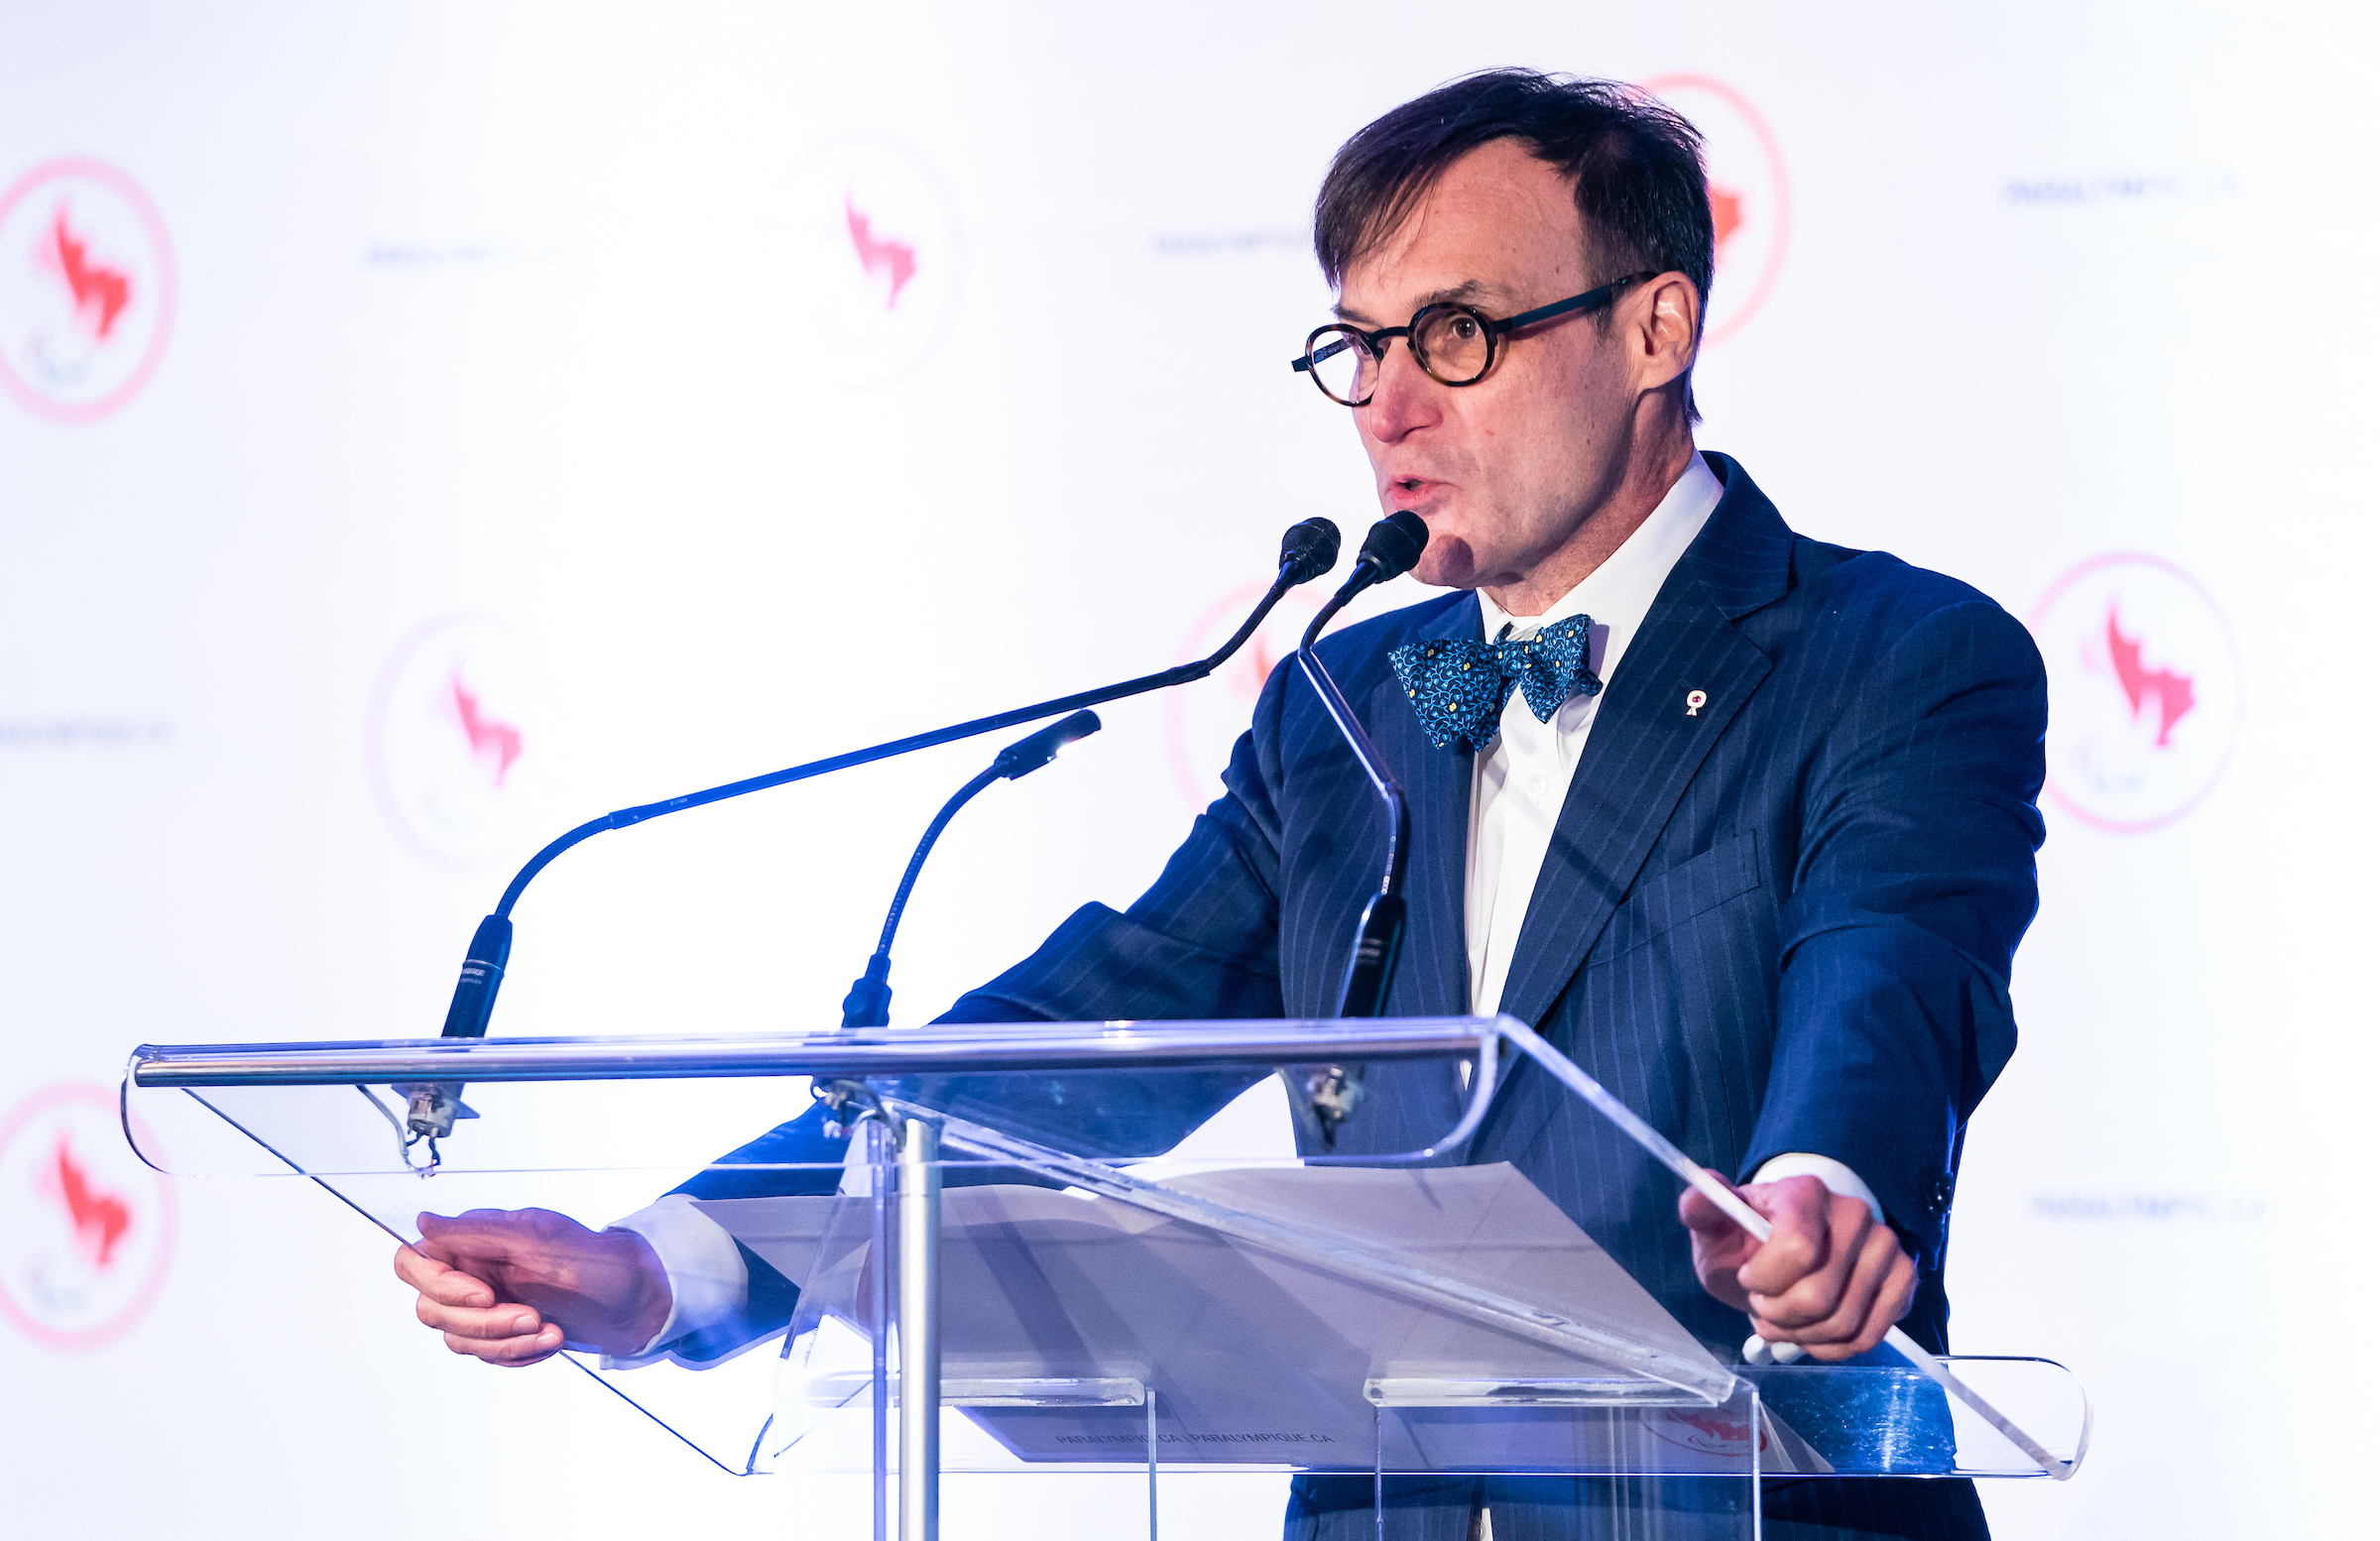 CPC president Marc-Andre Fabien speaks at the 2018 Canadian Paralympic summit.